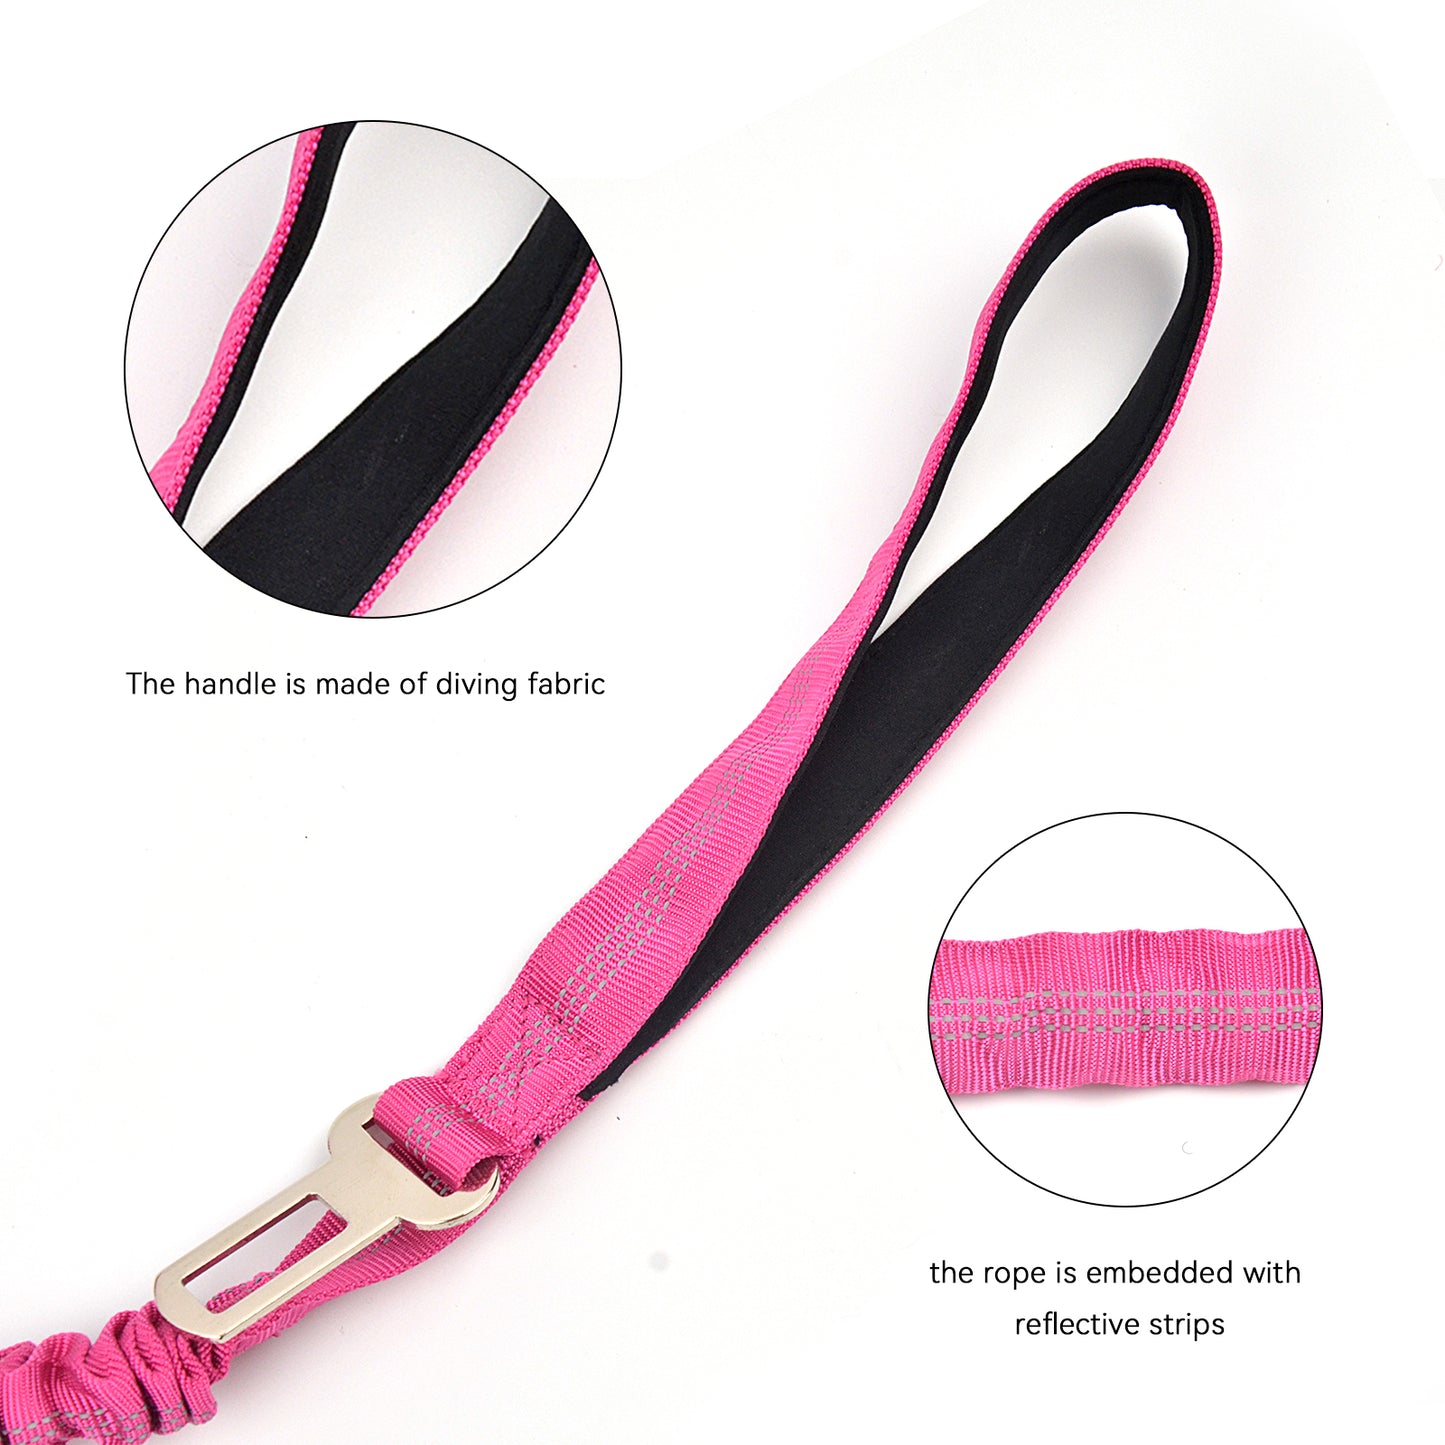 Royal Pets Stretchy Reflective Bungee Rope Leashes With Car Seat Belt Attachment - Double Padded Handle - Extra Strong Shock Absorber